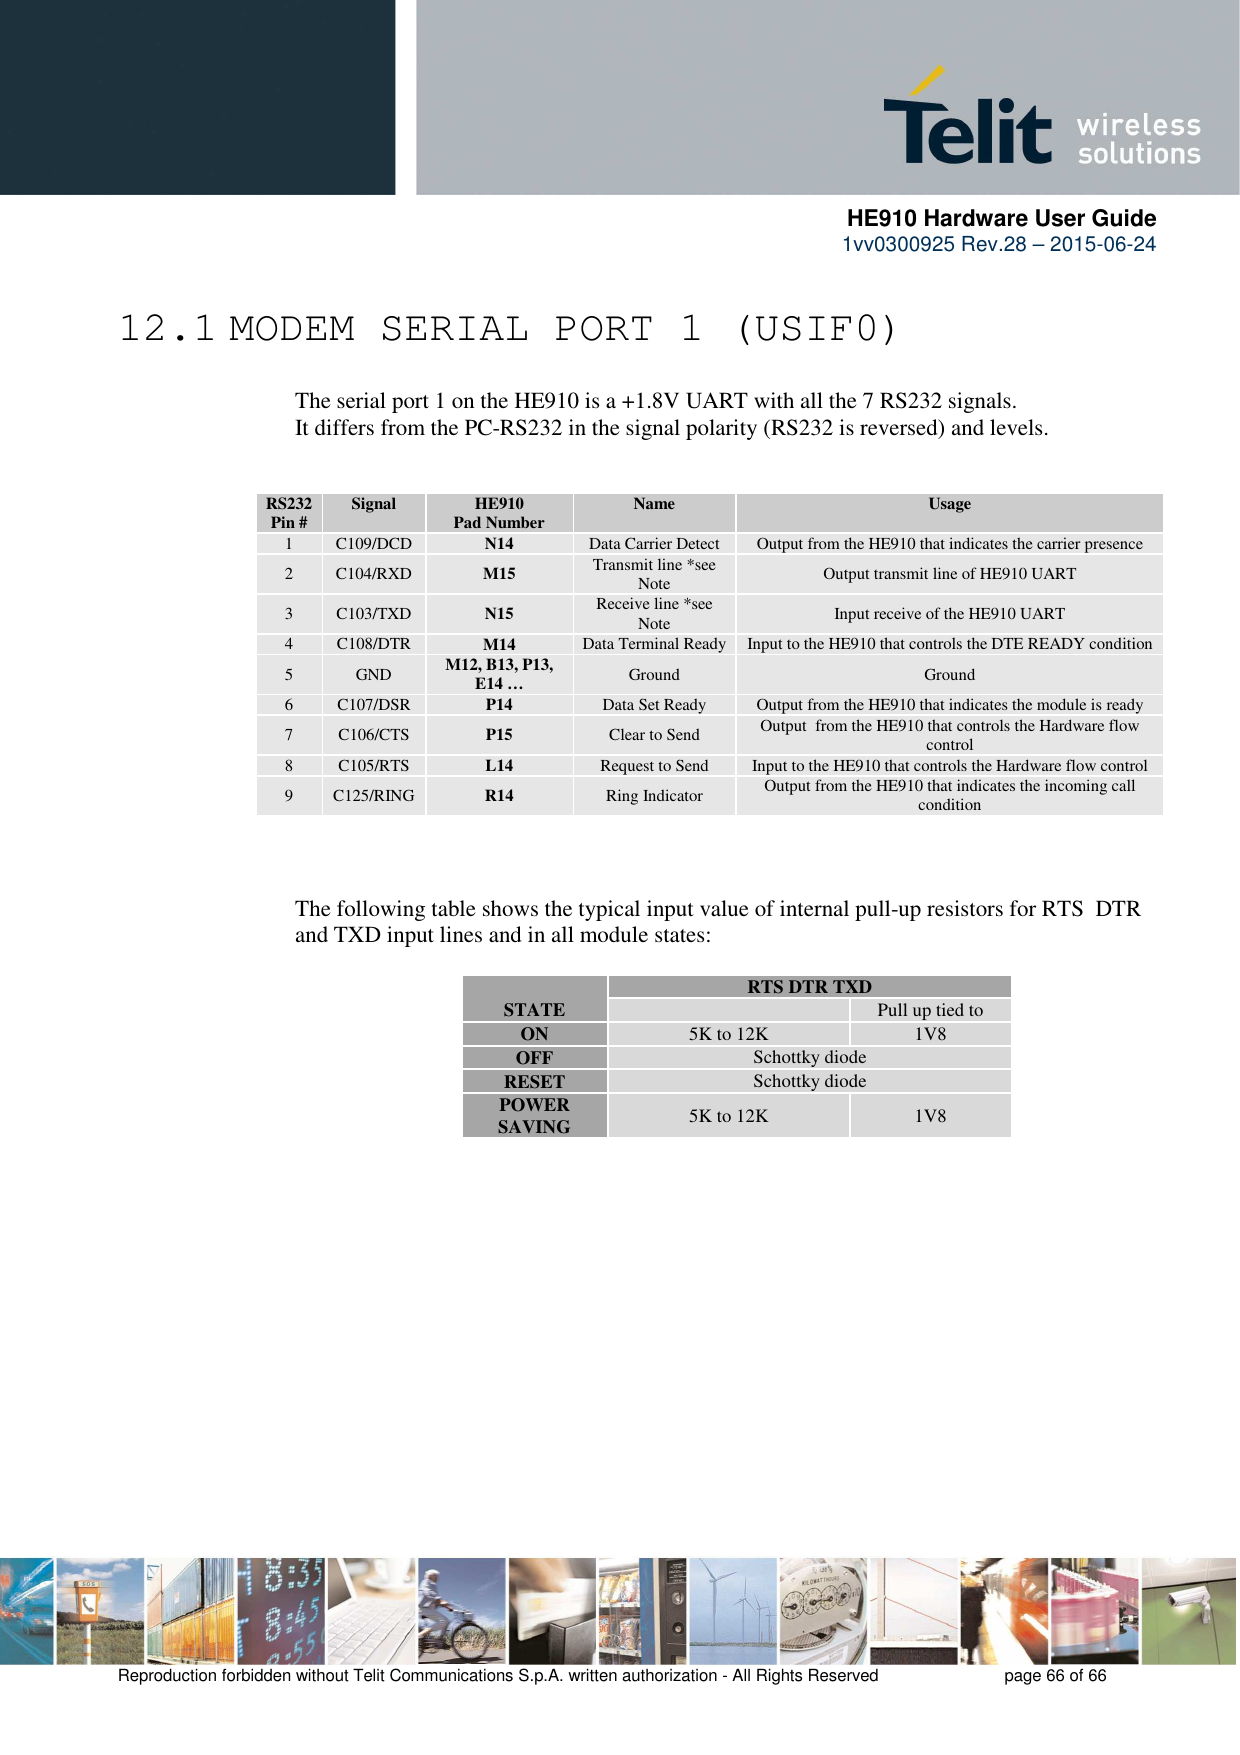      HE910 Hardware User Guide 1vv0300925 Rev.28 – 2015-06-24    Reproduction forbidden without Telit Communications S.p.A. written authorization - All Rights Reserved    page 66 of 66  12.1 MODEM SERIAL PORT 1 (USIF0)     The serial port 1 on the HE910 is a +1.8V UART with all the 7 RS232 signals.      It differs from the PC-RS232 in the signal polarity (RS232 is reversed) and levels.     RS232 Pin #  Signal  HE910 Pad Number  Name  Usage 1  C109/DCD  N14 Data Carrier Detect  Output from the HE910 that indicates the carrier presence 2  C104/RXD  M15 Transmit line *see Note  Output transmit line of HE910 UART 3  C103/TXD  N15 Receive line *see Note  Input receive of the HE910 UART 4  C108/DTR  M14 Data Terminal Ready  Input to the HE910 that controls the DTE READY condition 5  GND  M12, B13, P13, E14 …  Ground  Ground 6  C107/DSR  P14 Data Set Ready  Output from the HE910 that indicates the module is ready 7  C106/CTS  P15 Clear to Send  Output  from the HE910 that controls the Hardware flow control 8  C105/RTS  L14 Request to Send  Input to the HE910 that controls the Hardware flow control 9  C125/RING  R14 Ring Indicator  Output from the HE910 that indicates the incoming call condition    The following table shows the typical input value of internal pull-up resistors for RTS  DTR and TXD input lines and in all module states:   STATE  RTS DTR TXD   Pull up tied to ON  5K to 12K  1V8 OFF  Schottky diode RESET  Schottky diode POWER SAVING  5K to 12K  1V8  